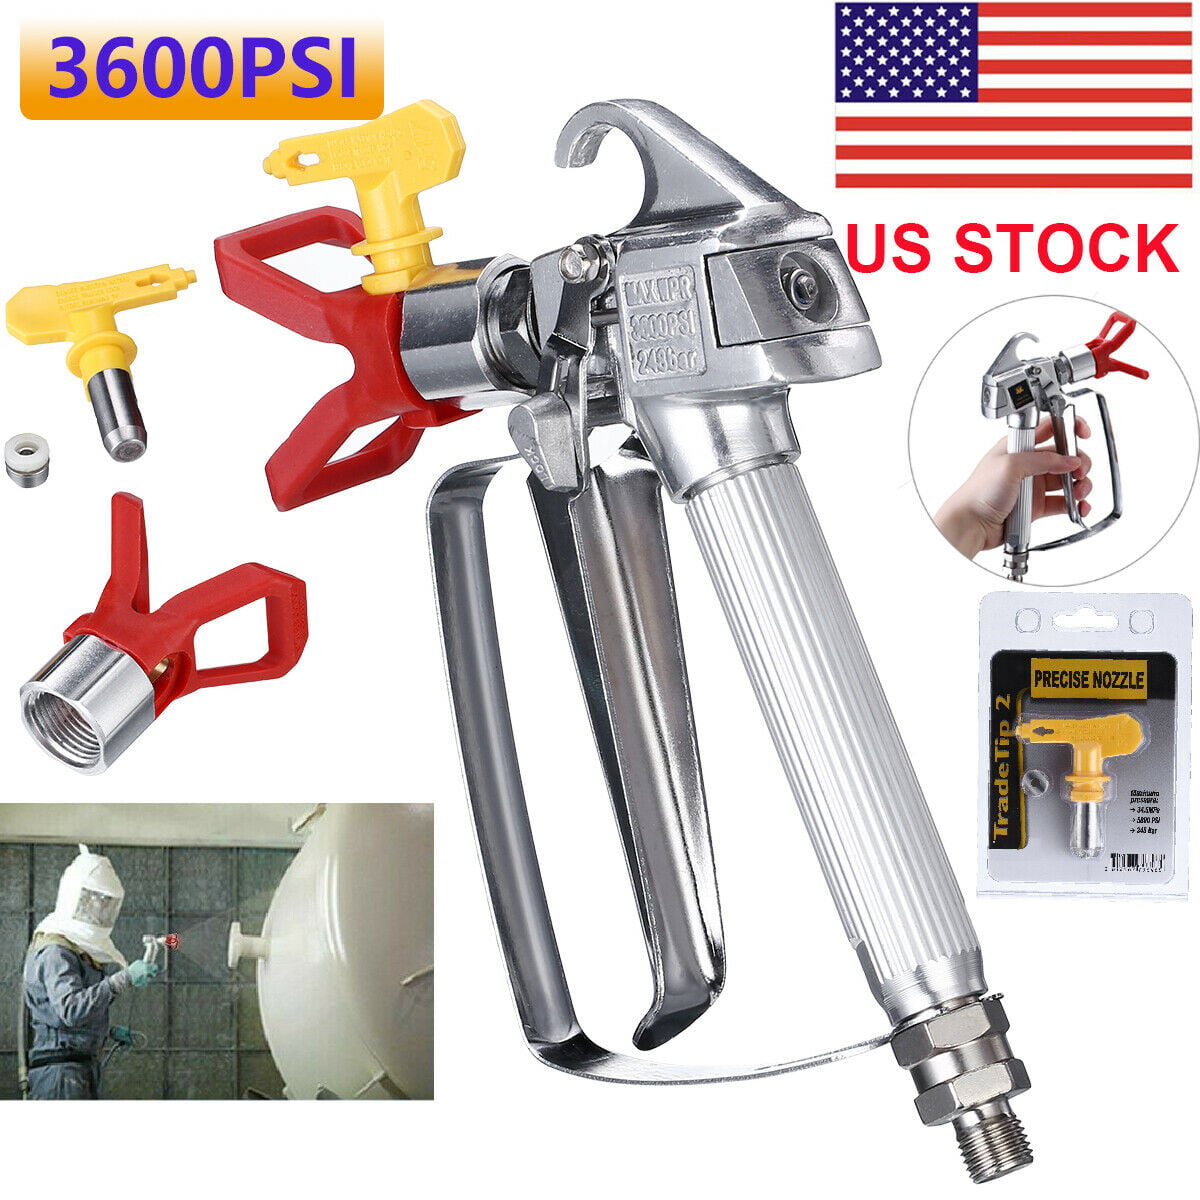 Paint Spray Gun 3600PSI High Pressure Airless With 517 Tip Nozzle Guard Wacner 